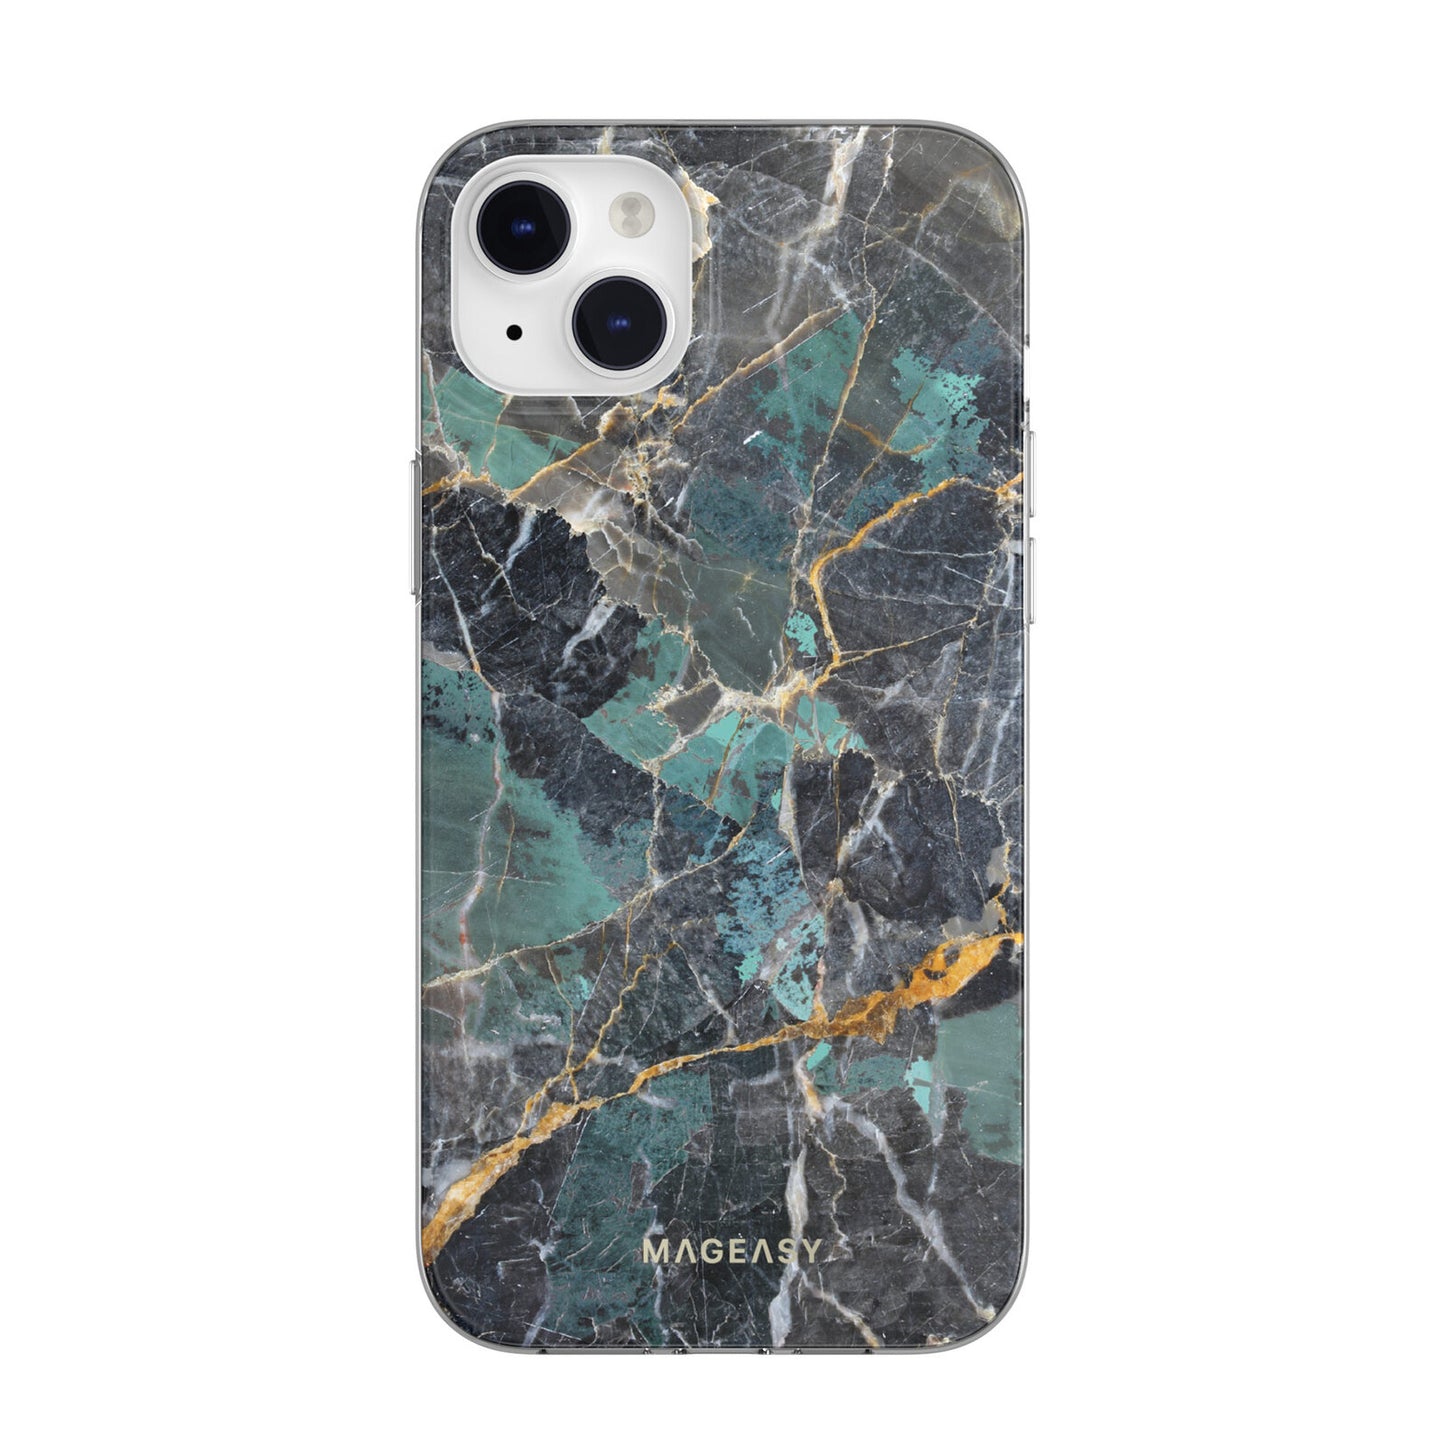 Iphone 14 pro Max Marble Shockproof Case Strong Heavy Duty Grip Hold Slim Cover